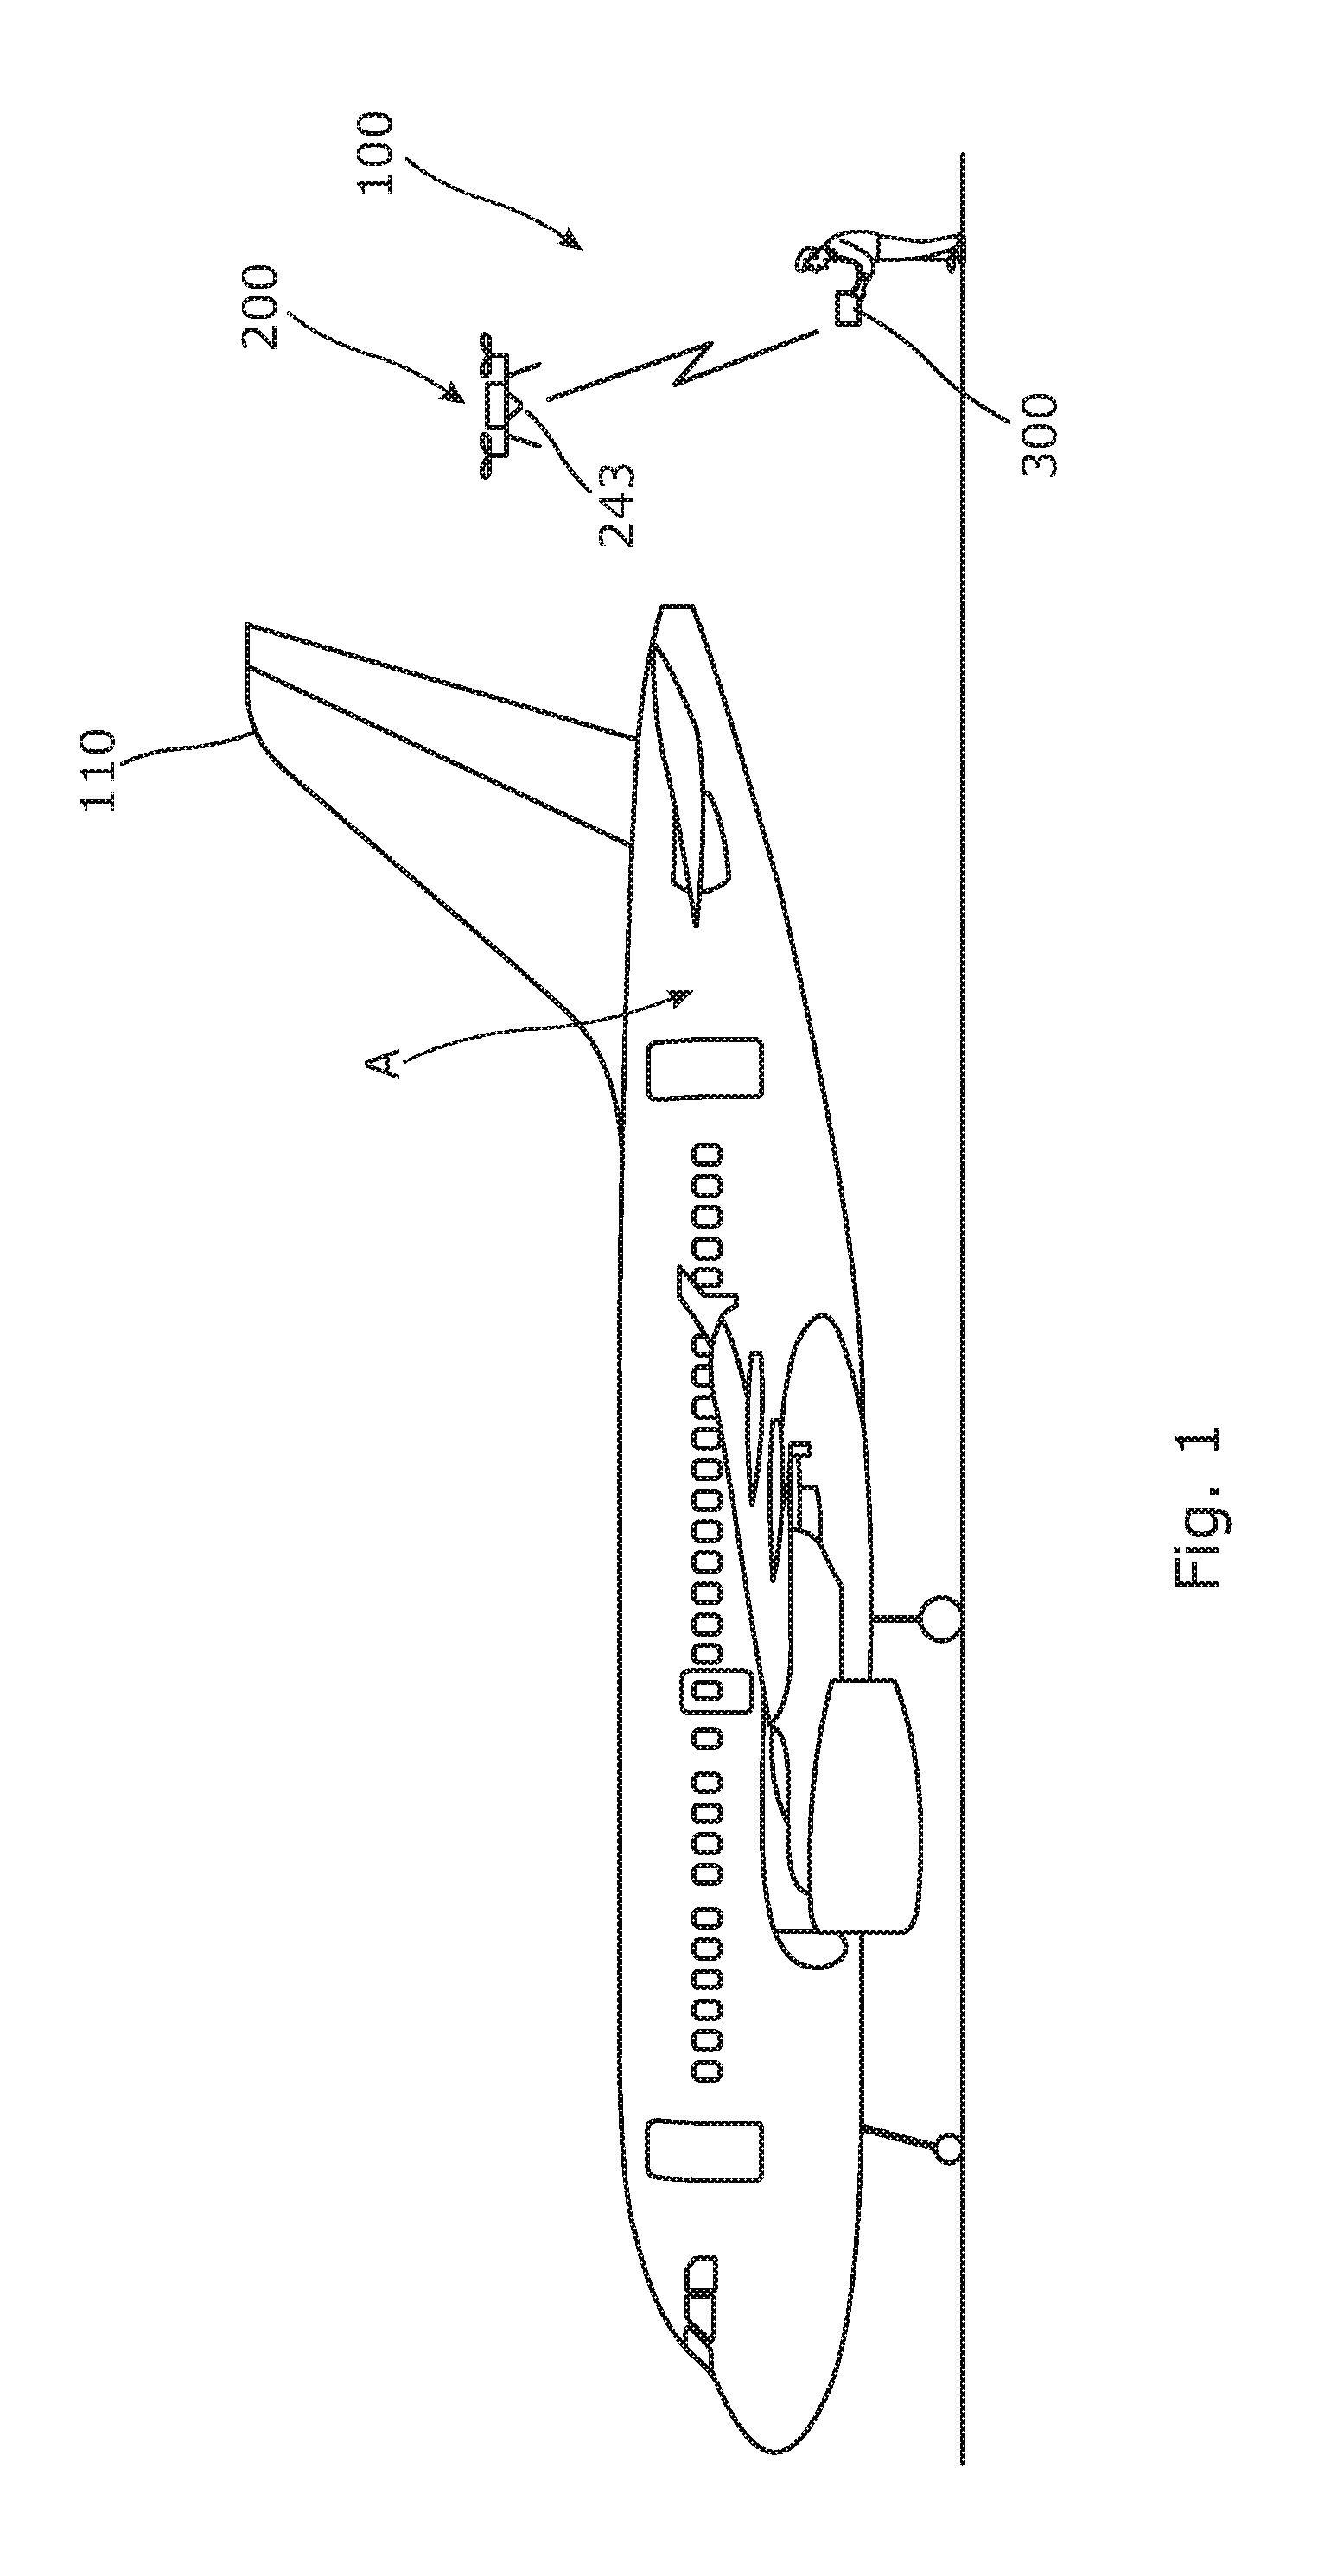 System and method for locating impacts on an external surface